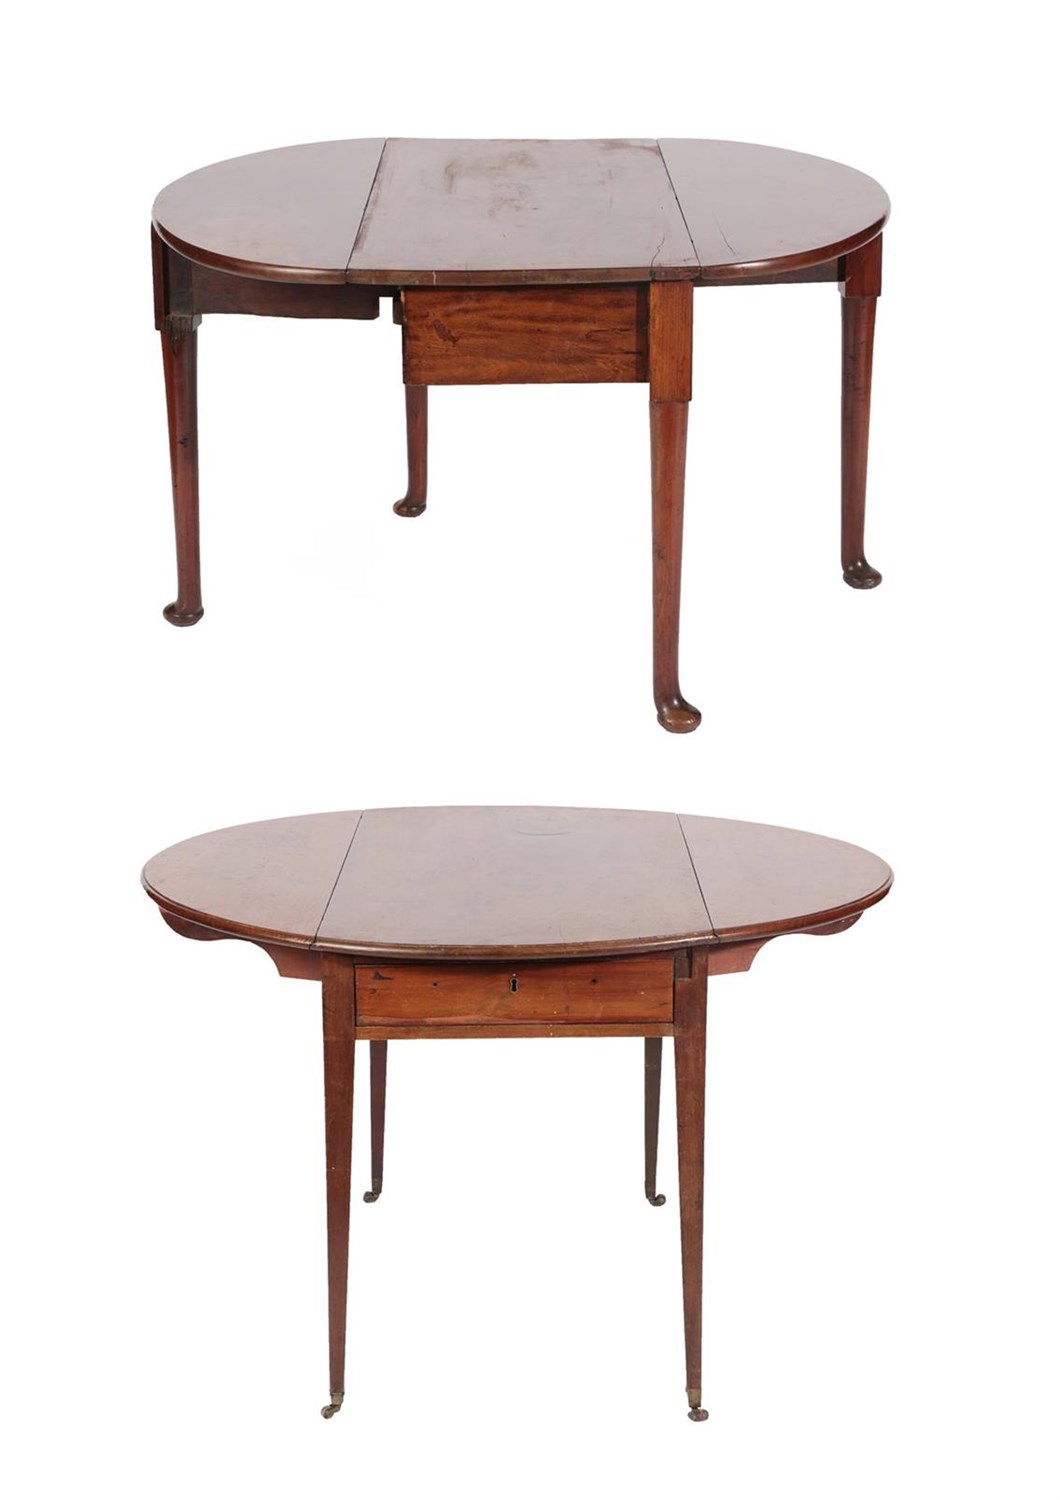 Lot 626 - ~ A George III Mahogany Dining Table, late 18th century, with two rounded leaves to form an...